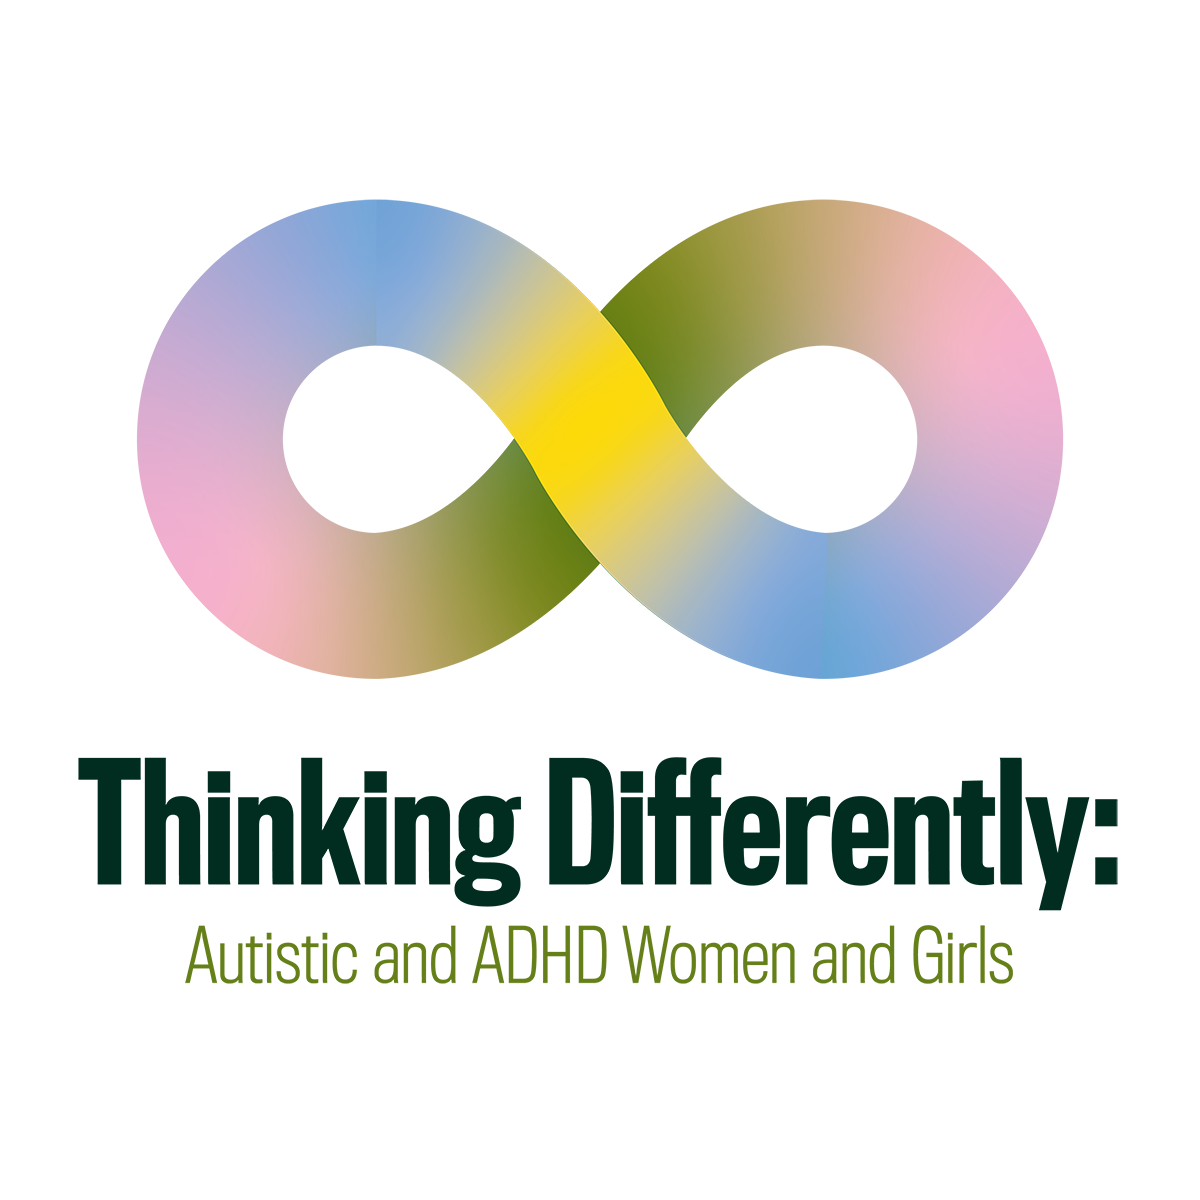 Thinking Differently campaign logo